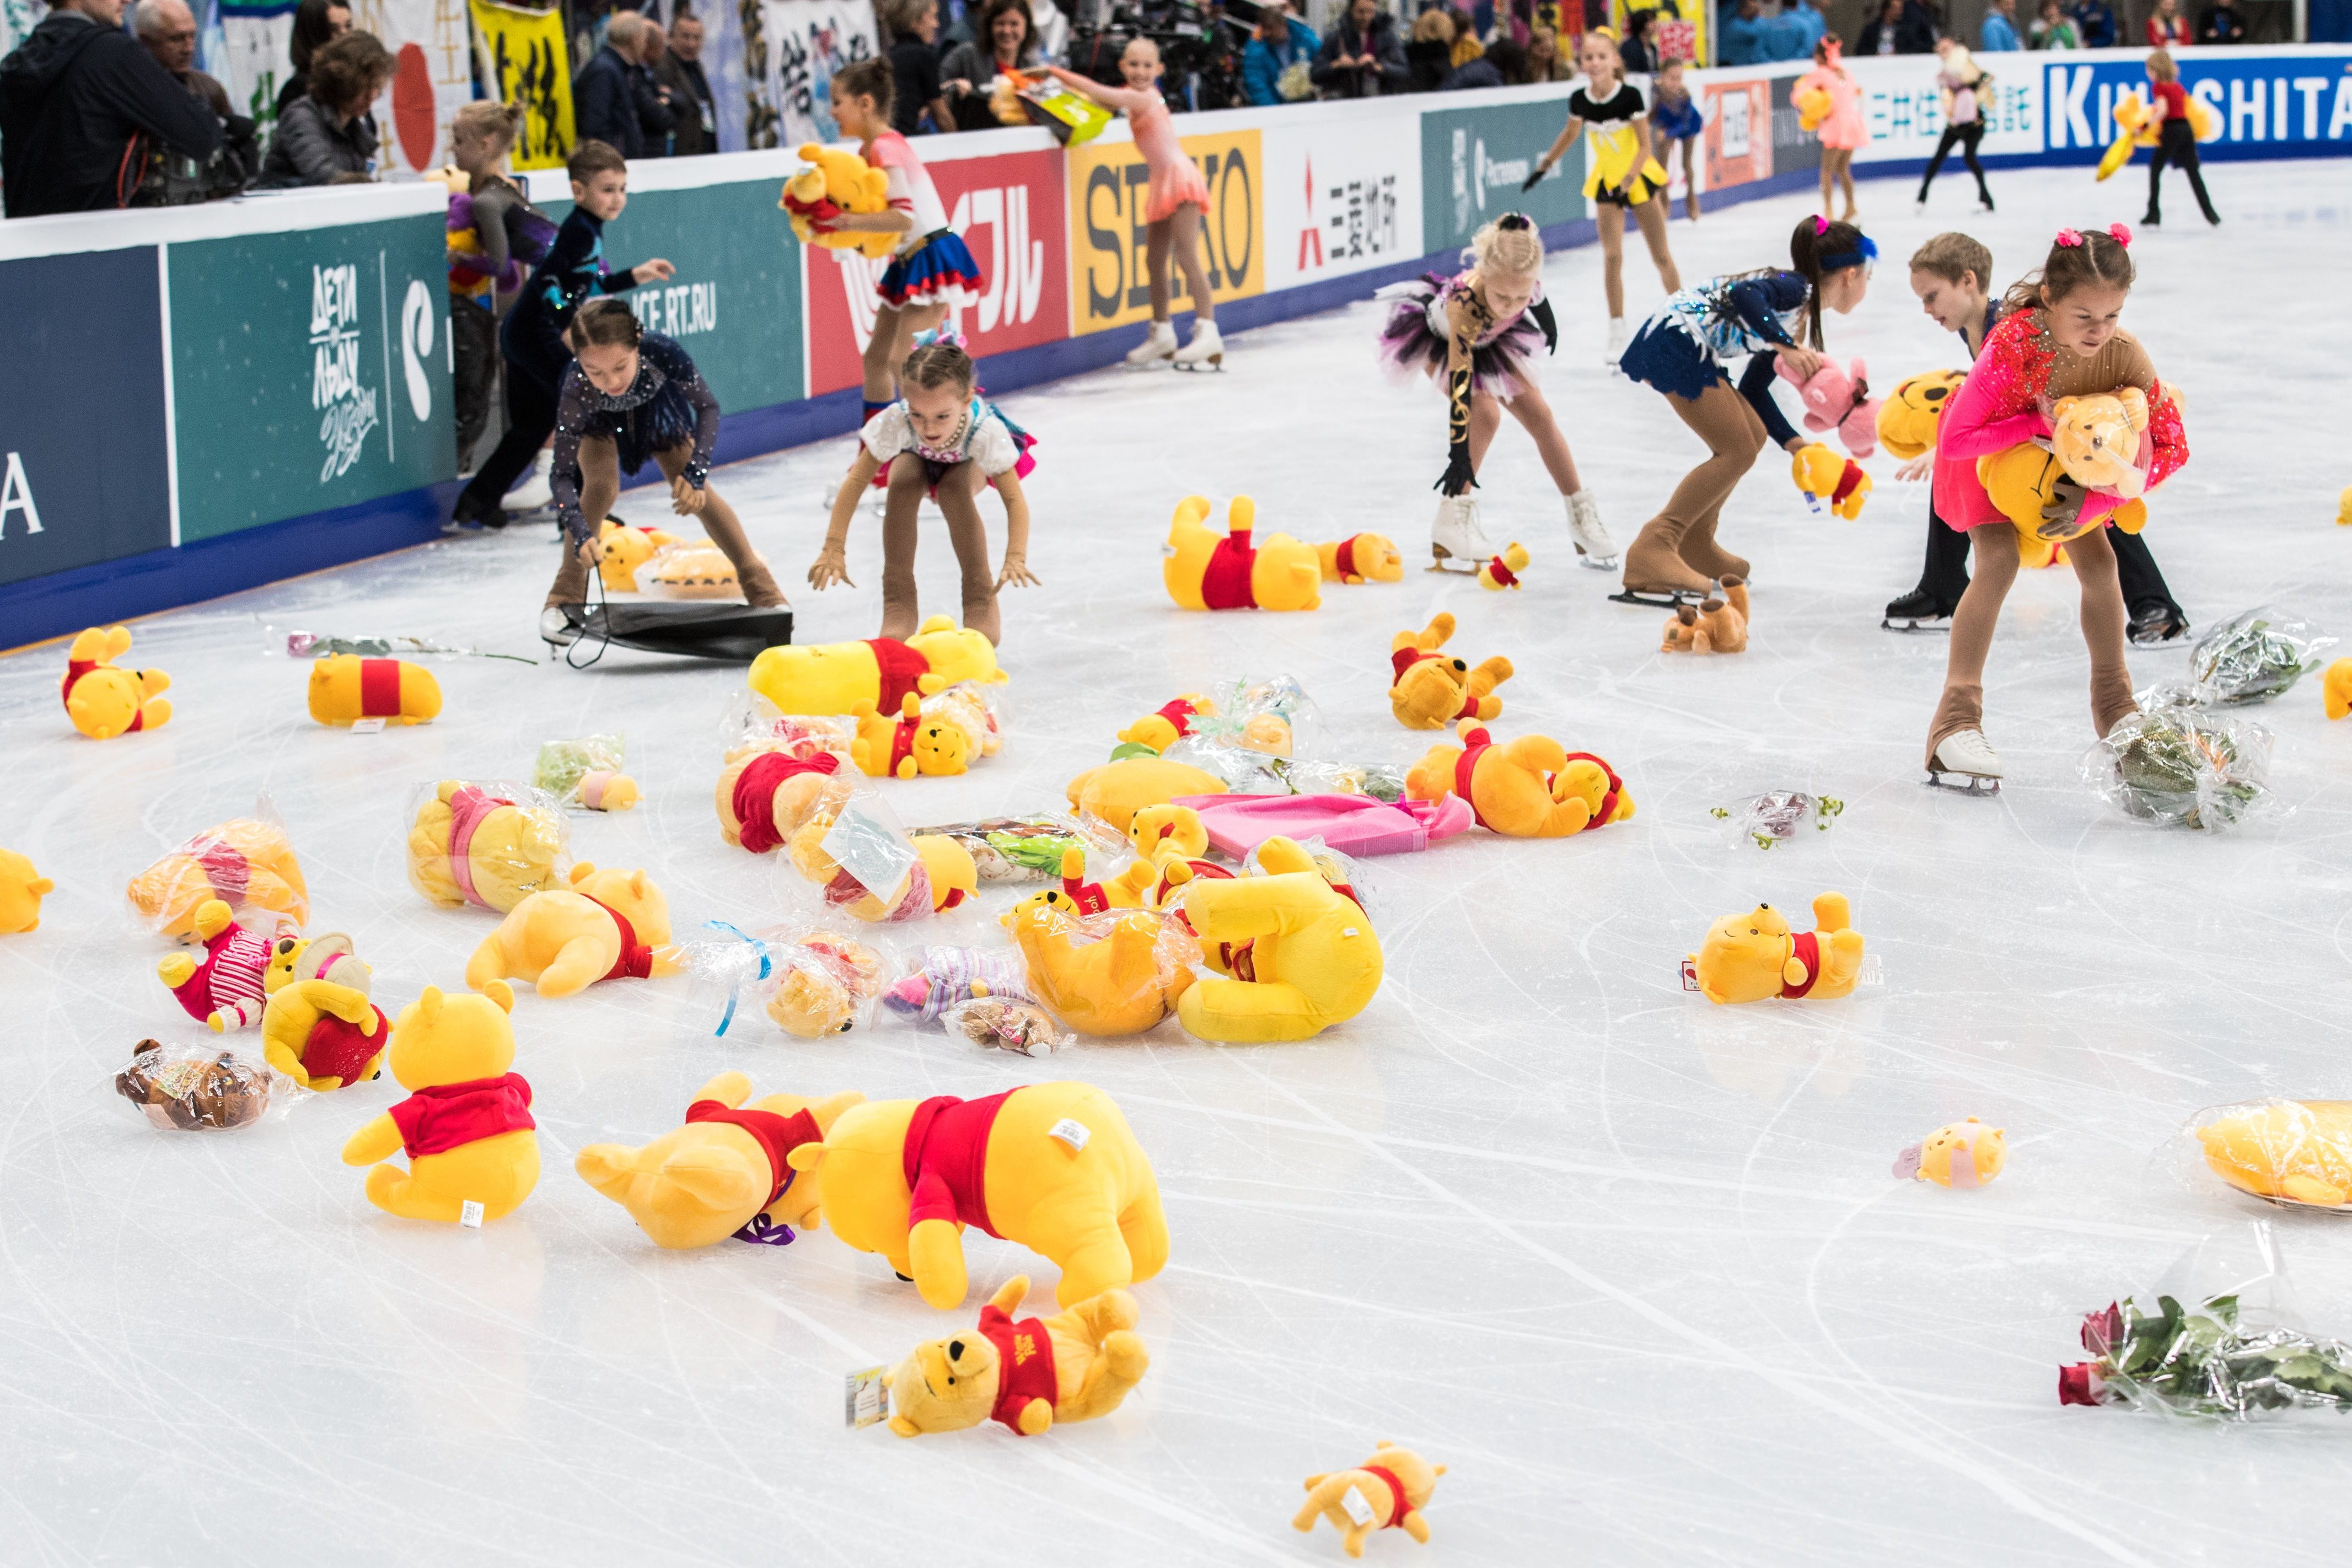 Children collect stuffed toy bears from the ice after Japan's Yuzuru Hanyu performed his routine in the men's short program at the Rostelecom Cup 2017 ISU Grand Prix.